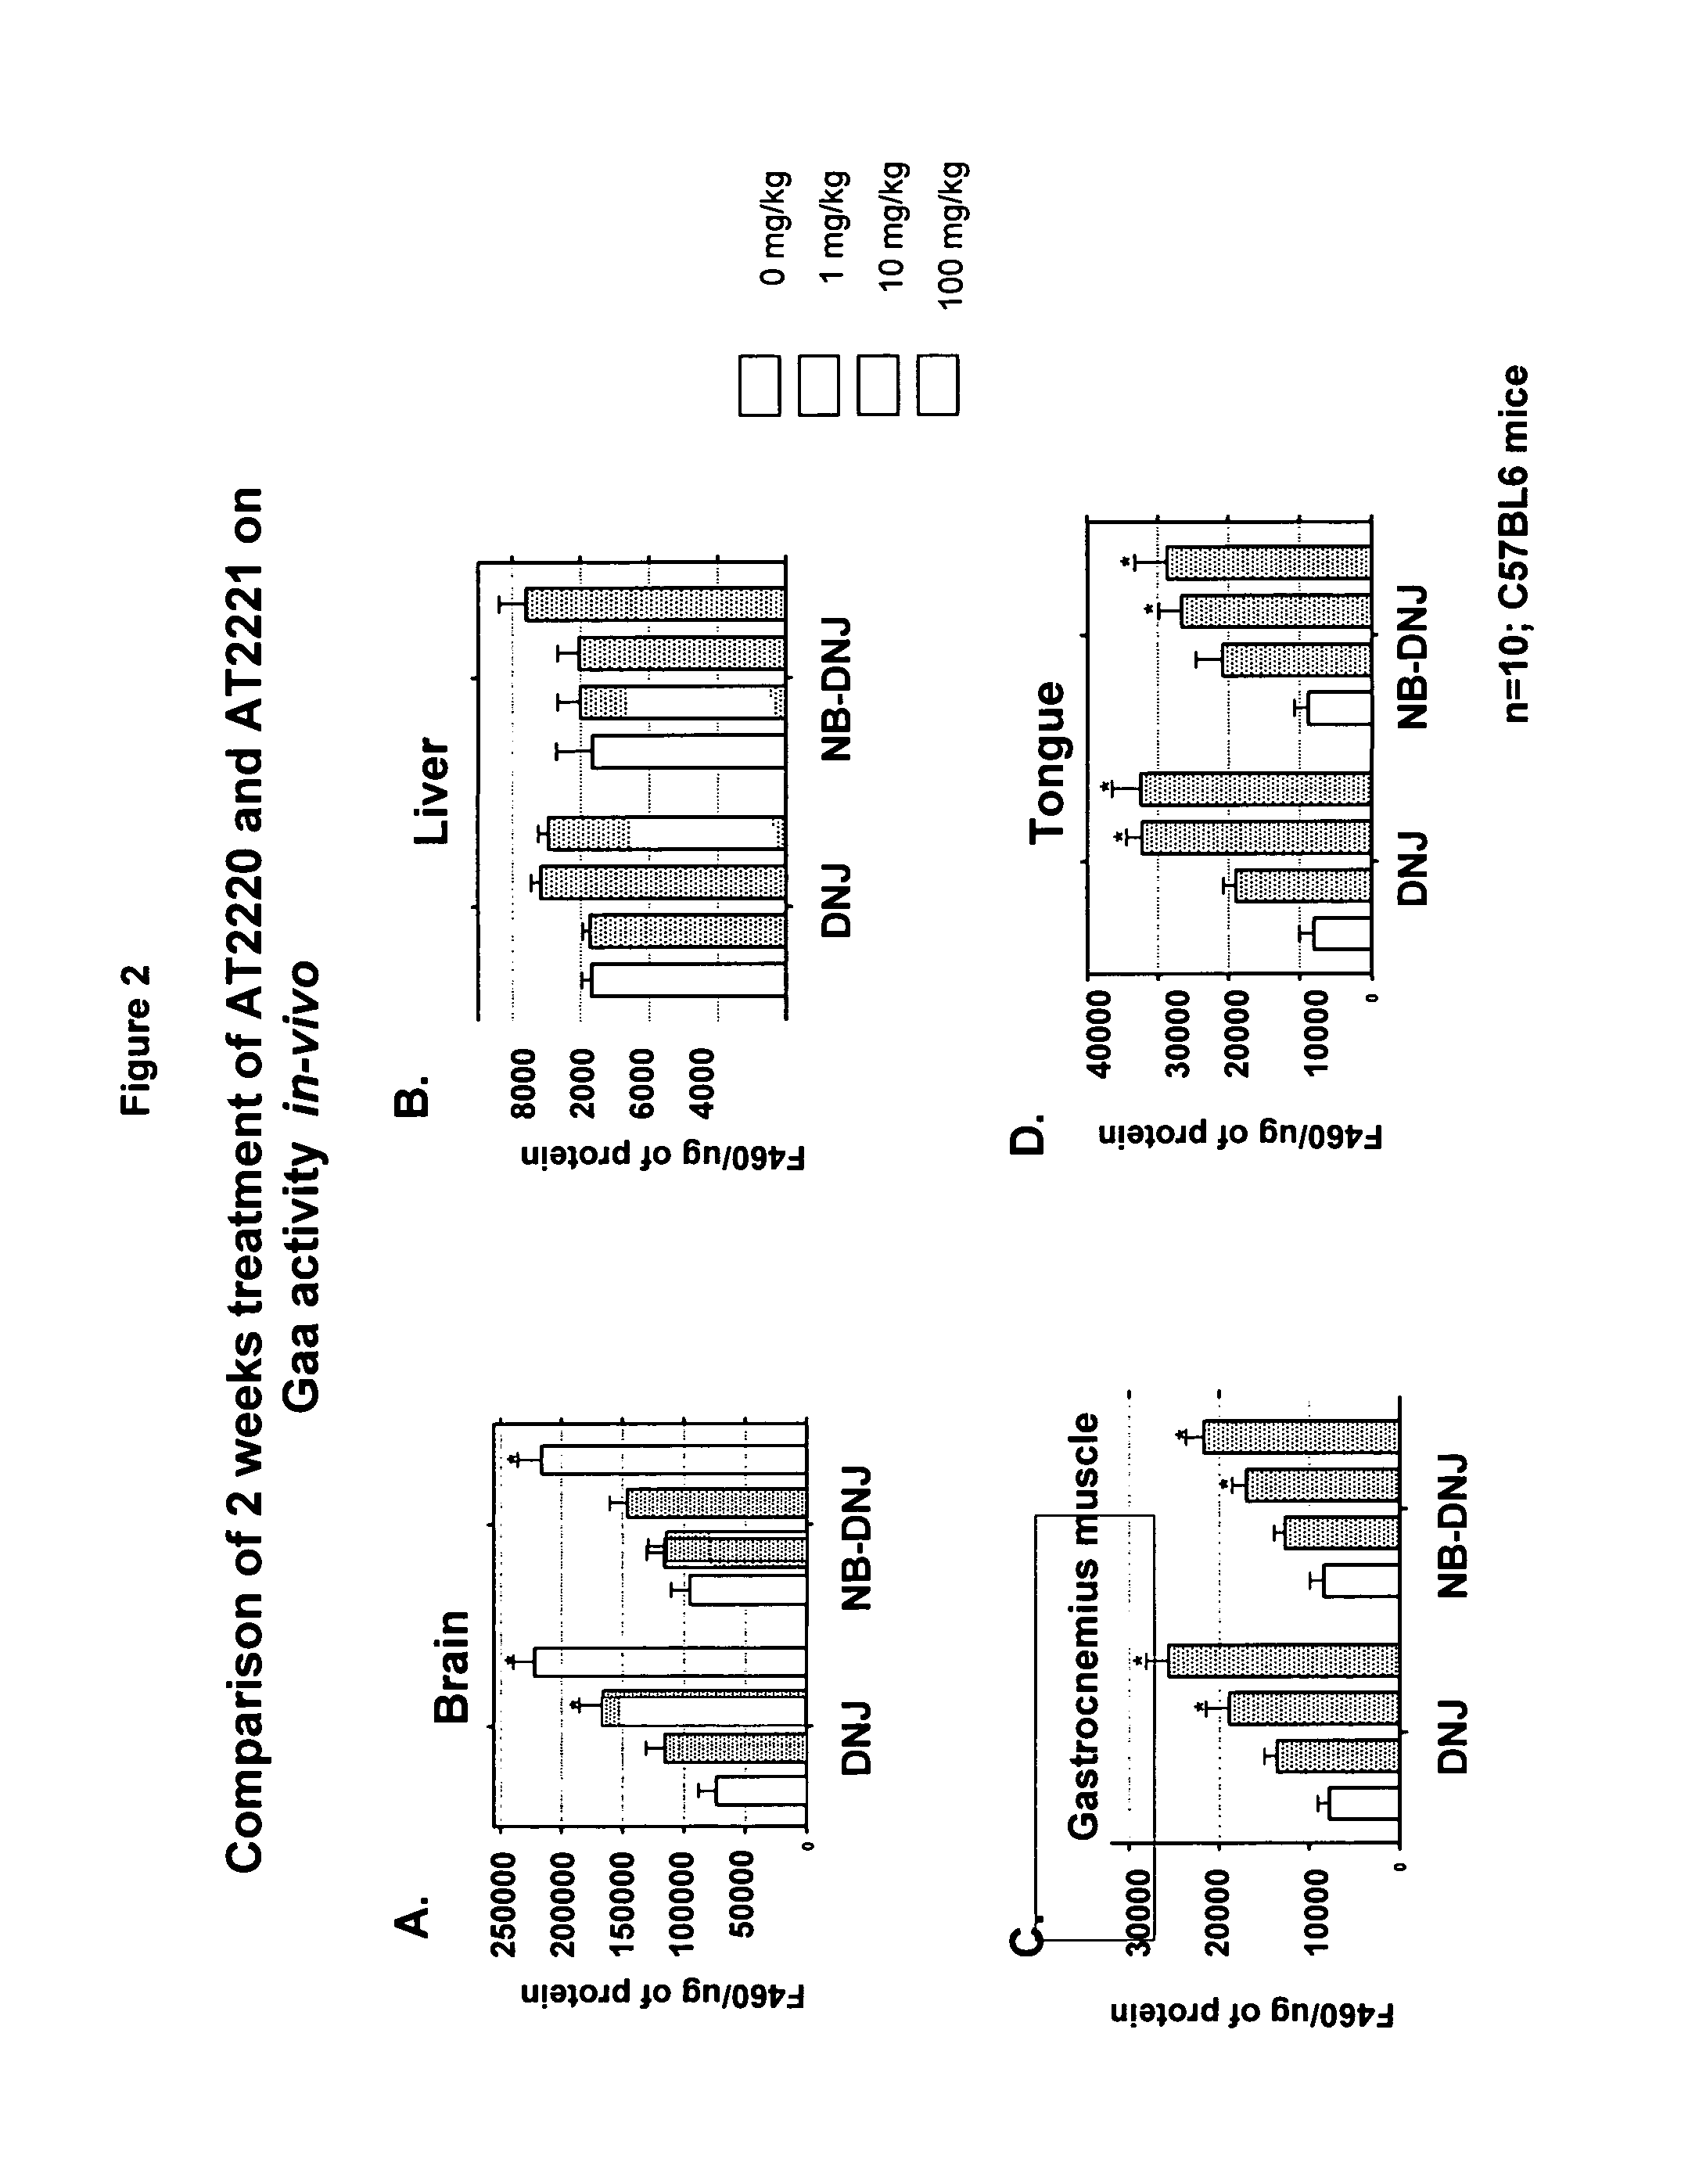 Method for the treatment of pompe disease using 1-deoxynojirimycin and derivatives